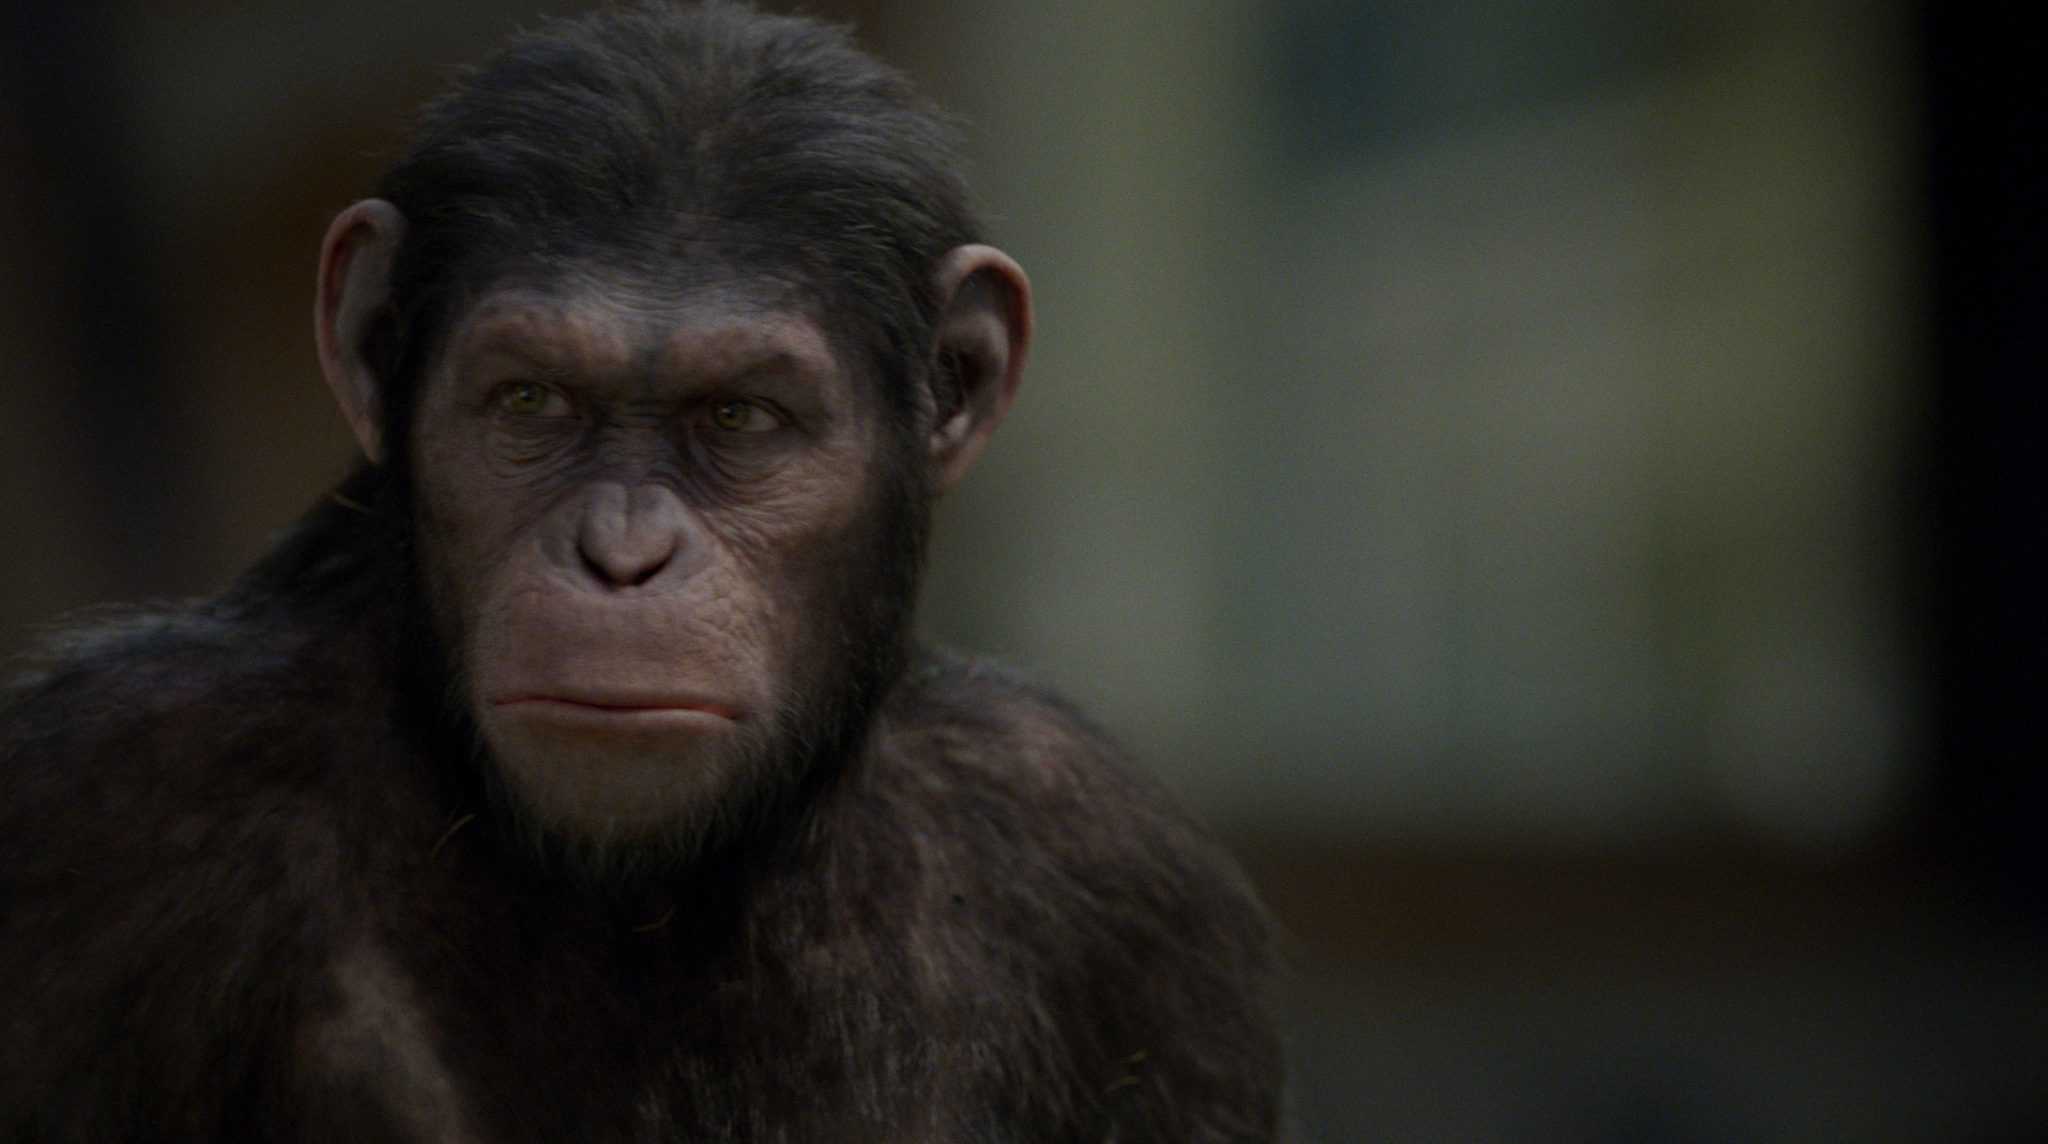 RISE OF THE PLANET OF THE APES